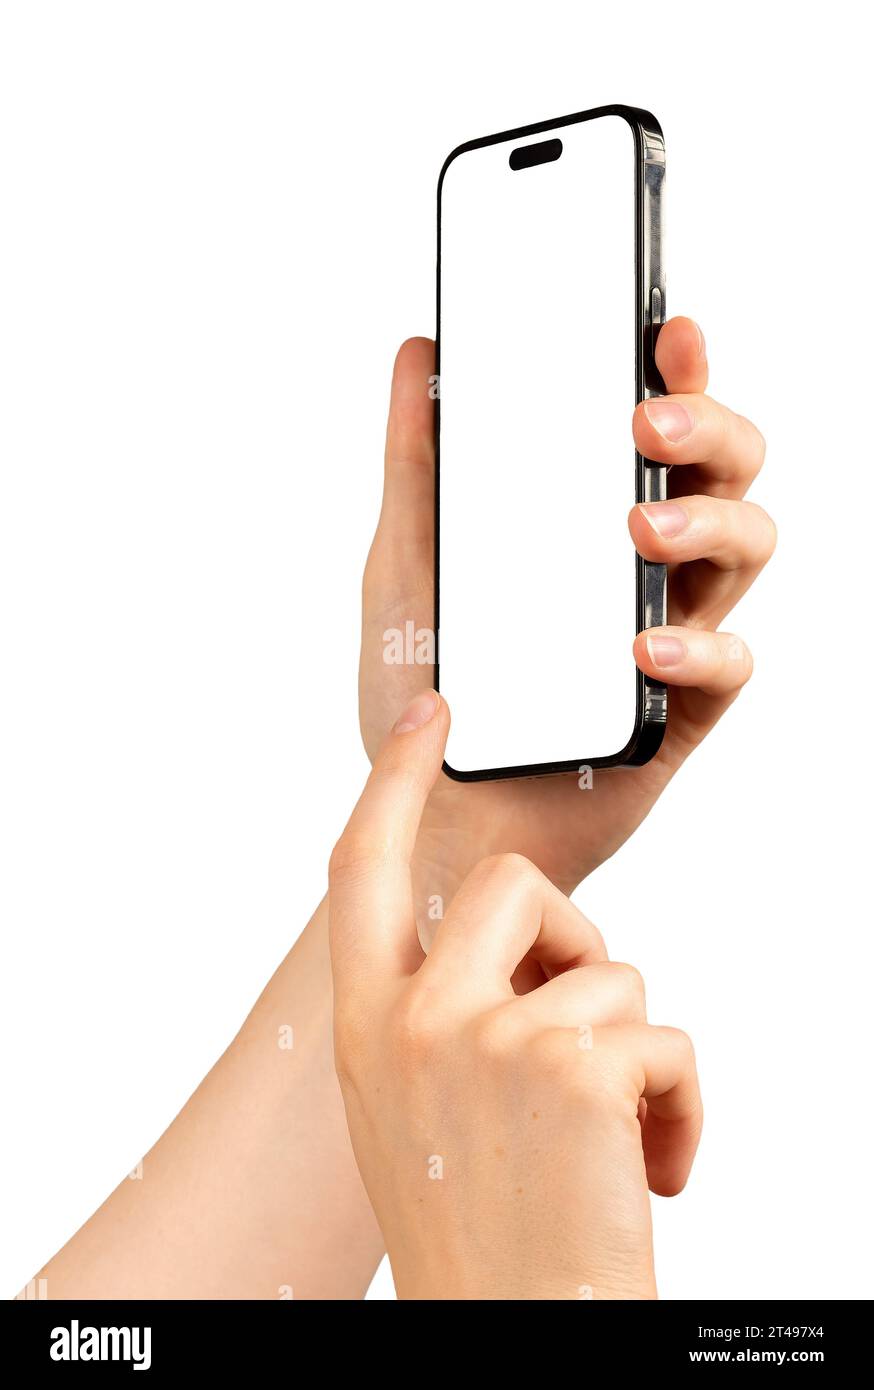 Hand holding mobile phone screen mockup, iphone 14 pro mock-up, tapping on smartphone display, isolated on white Stock Photo